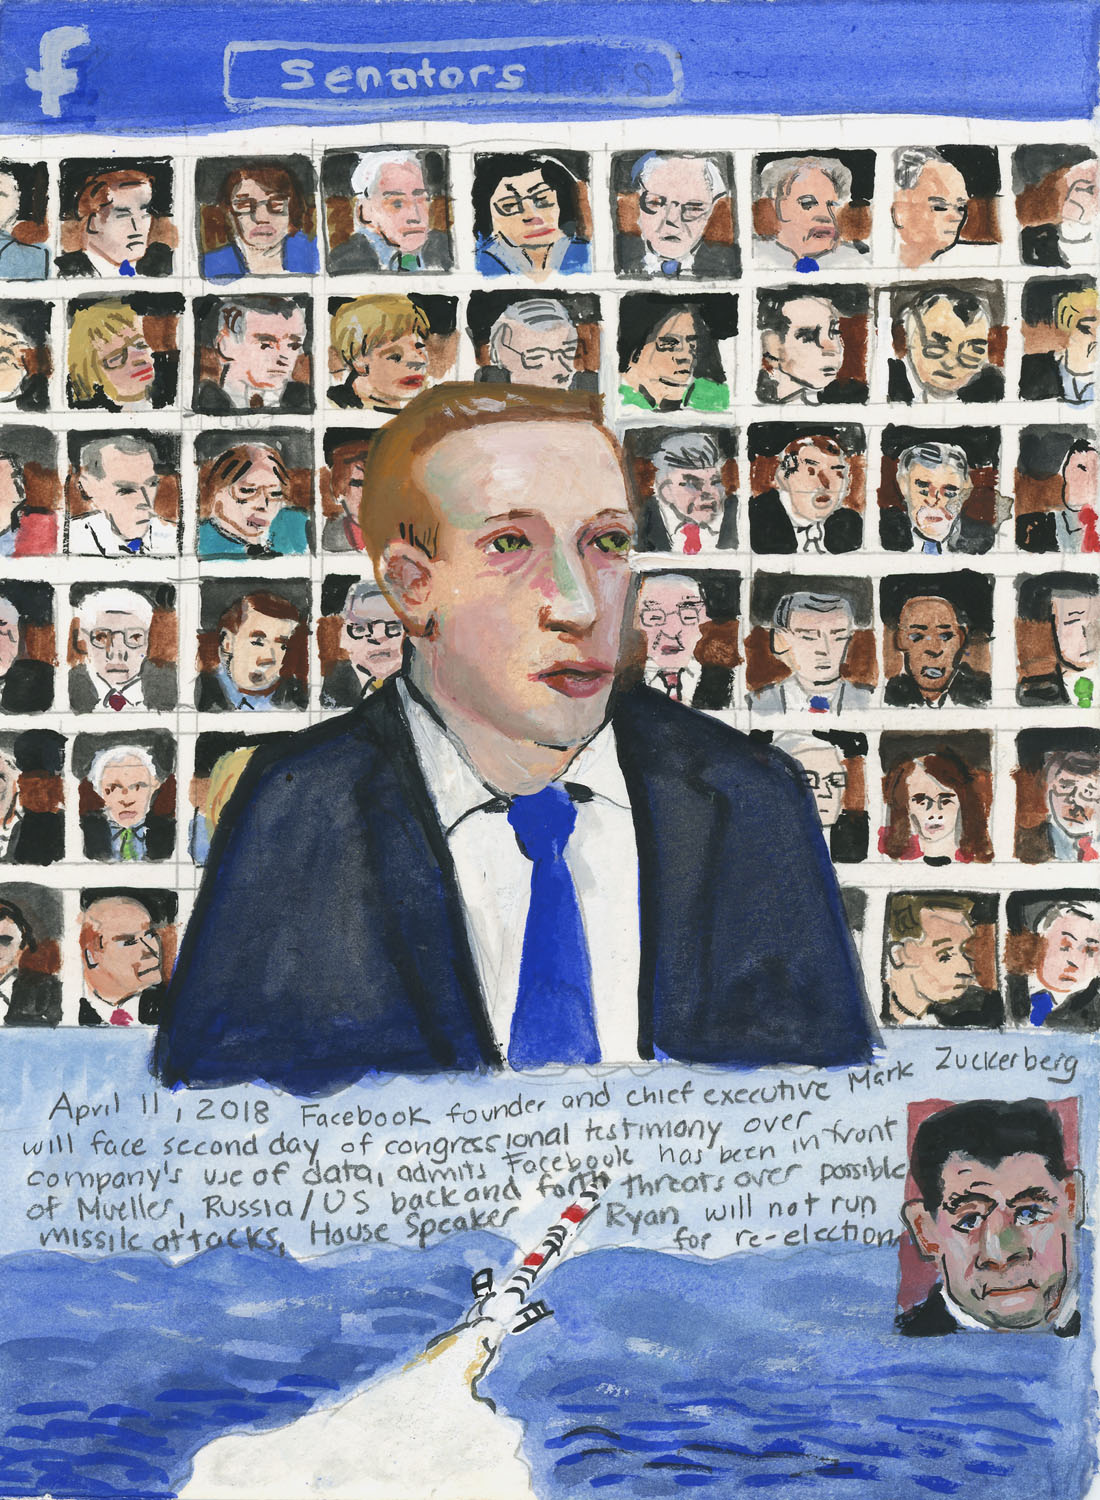 Day 872 (April 11, 2018) <br>Watercolor, gouache, casein, graphite on paper, 8 x 6 in. <br><i>Facebook founder and chief executive Mark Zuckerberg will face second day of congressional testimony over company’s use of data, admits Facebook has been in front of Mueller, Russia/US back and forth threats over possible missile attacks, House Speaker Ryan will not run for re-election.</i>